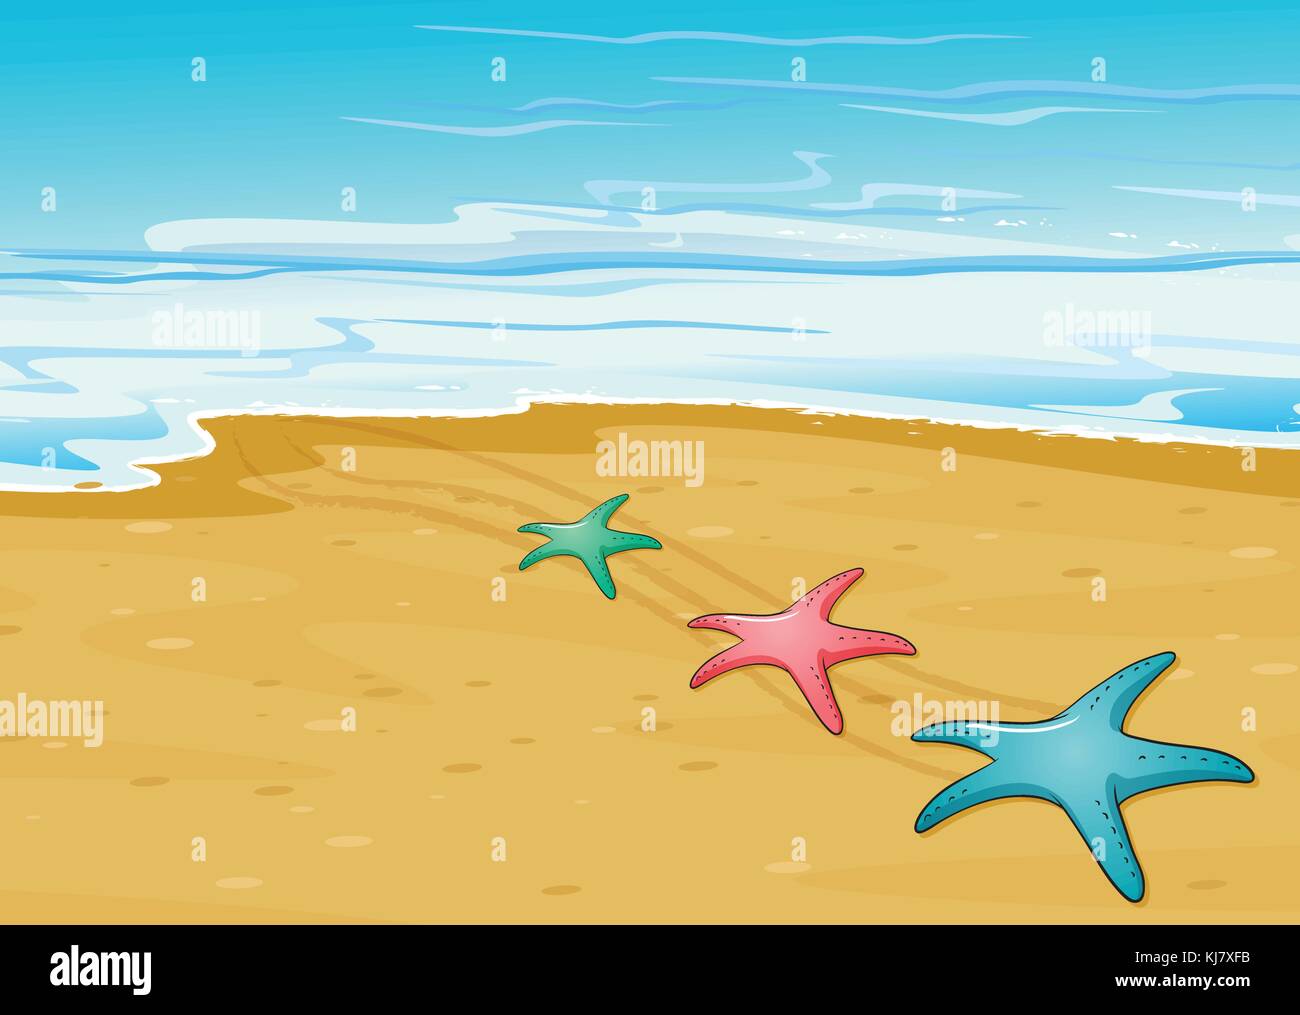 Illustration of the three colorful starfishes in the beach Stock Vector